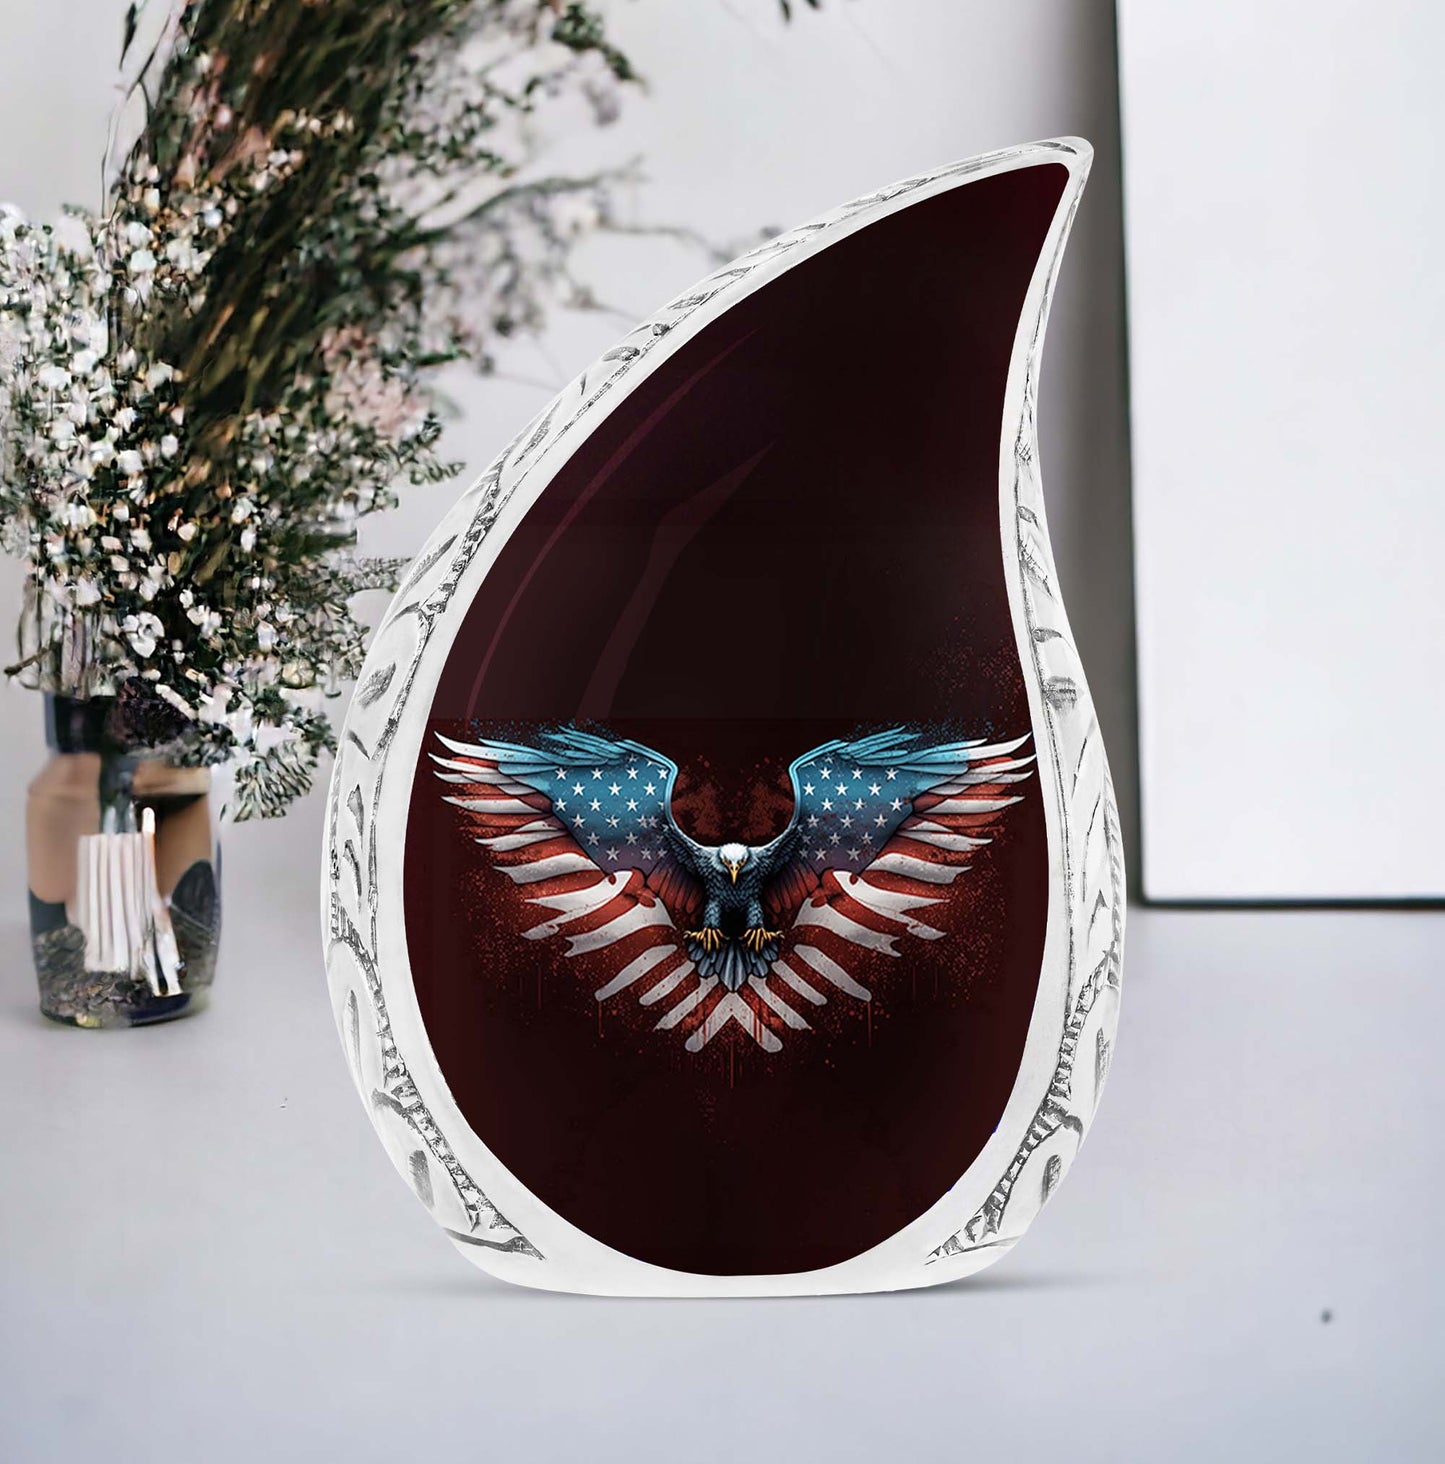 Large American Eagle urn for storing human ashes, ideal for preserving remains of an adult female